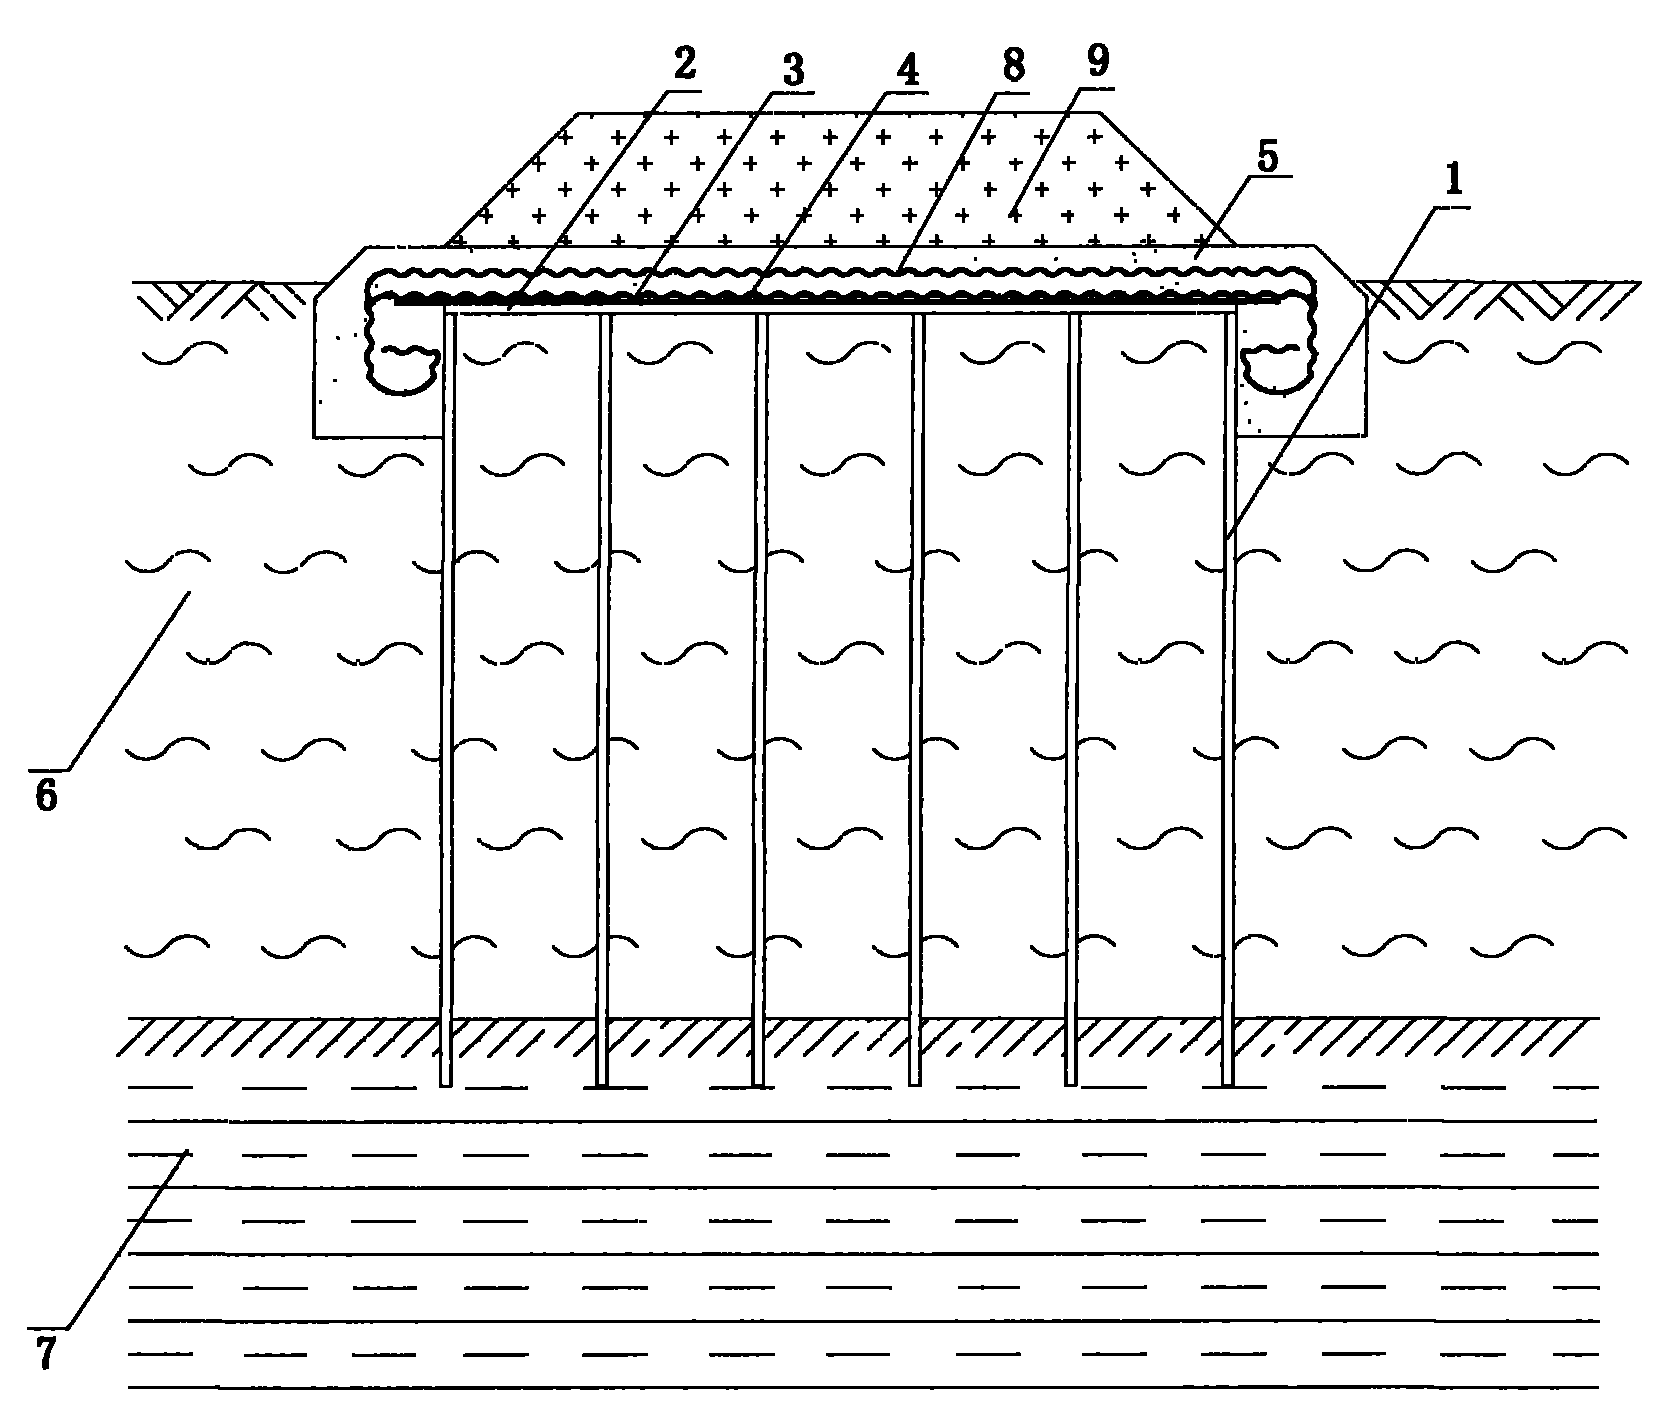 Rigid gridding and pile combined foundation and its use in soft soil foundation reinforcement